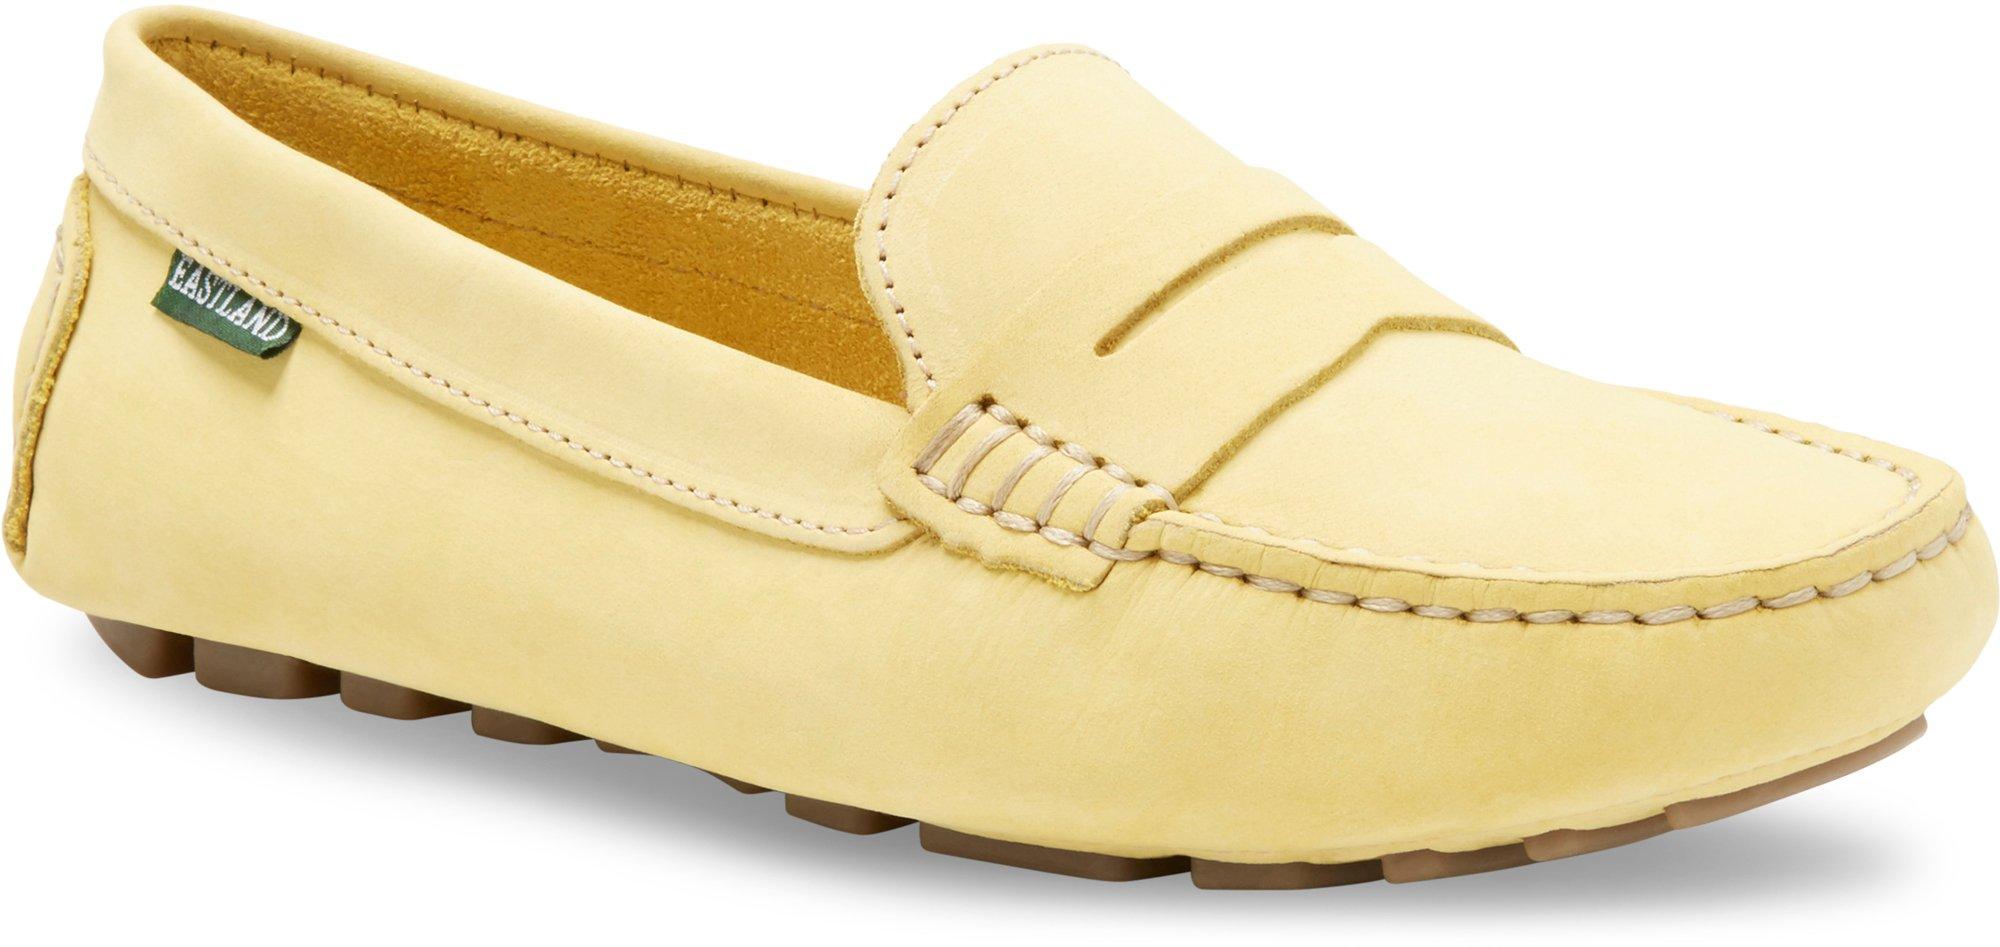 Womens Patricia Penny Loafers